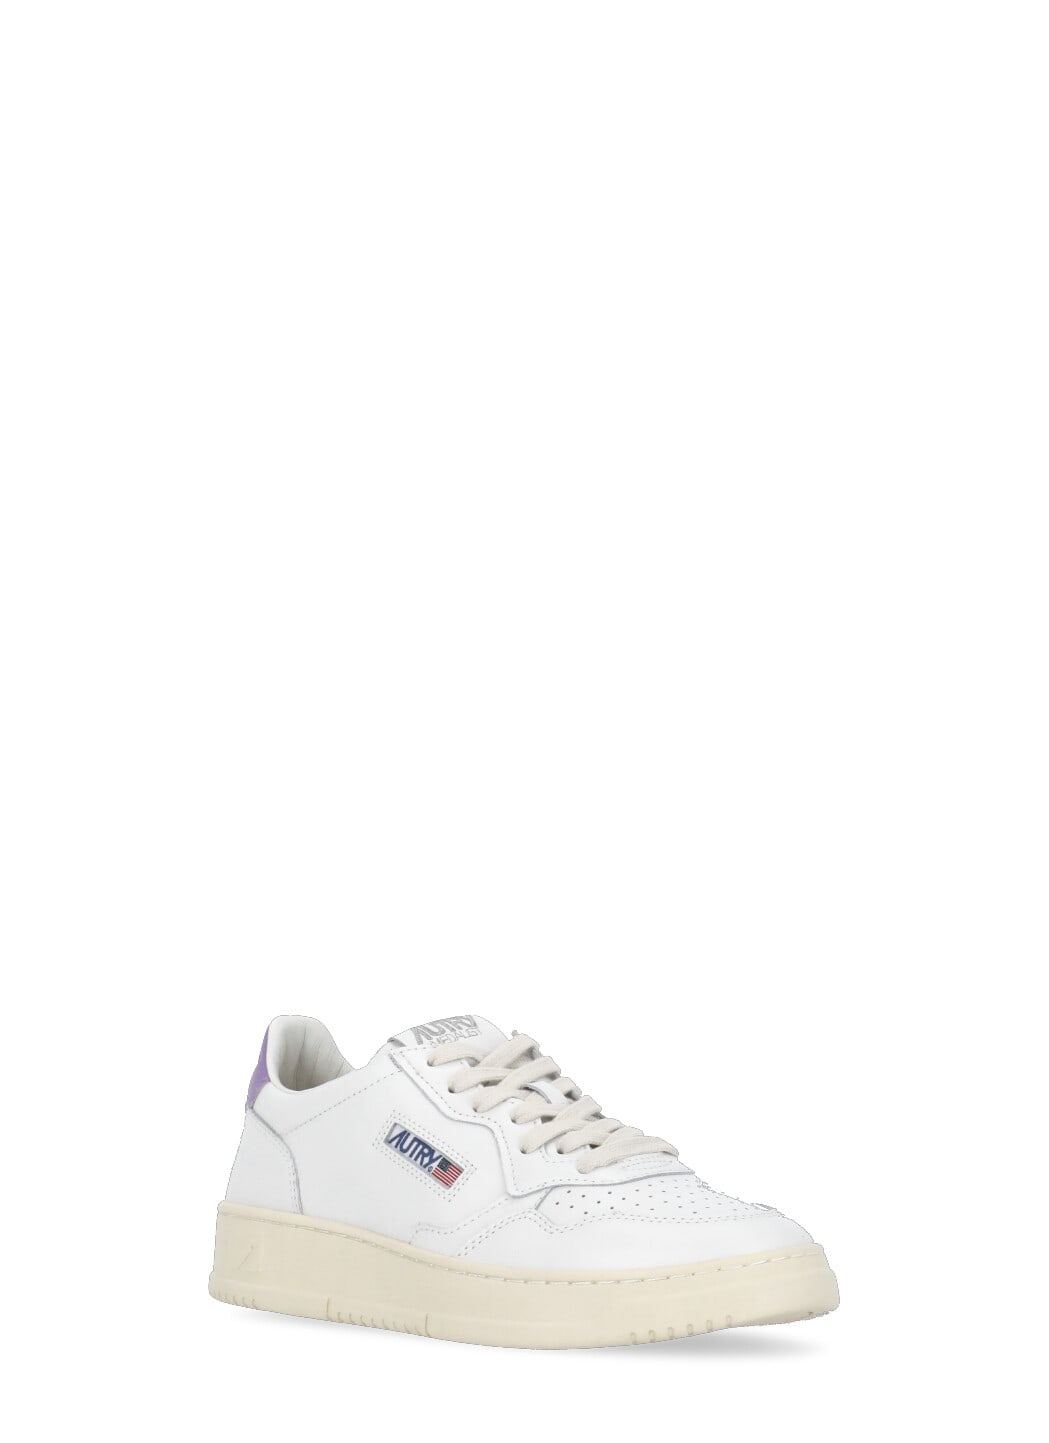 Shop Autry Sneakers Medalist Low In Wht/engl Lav